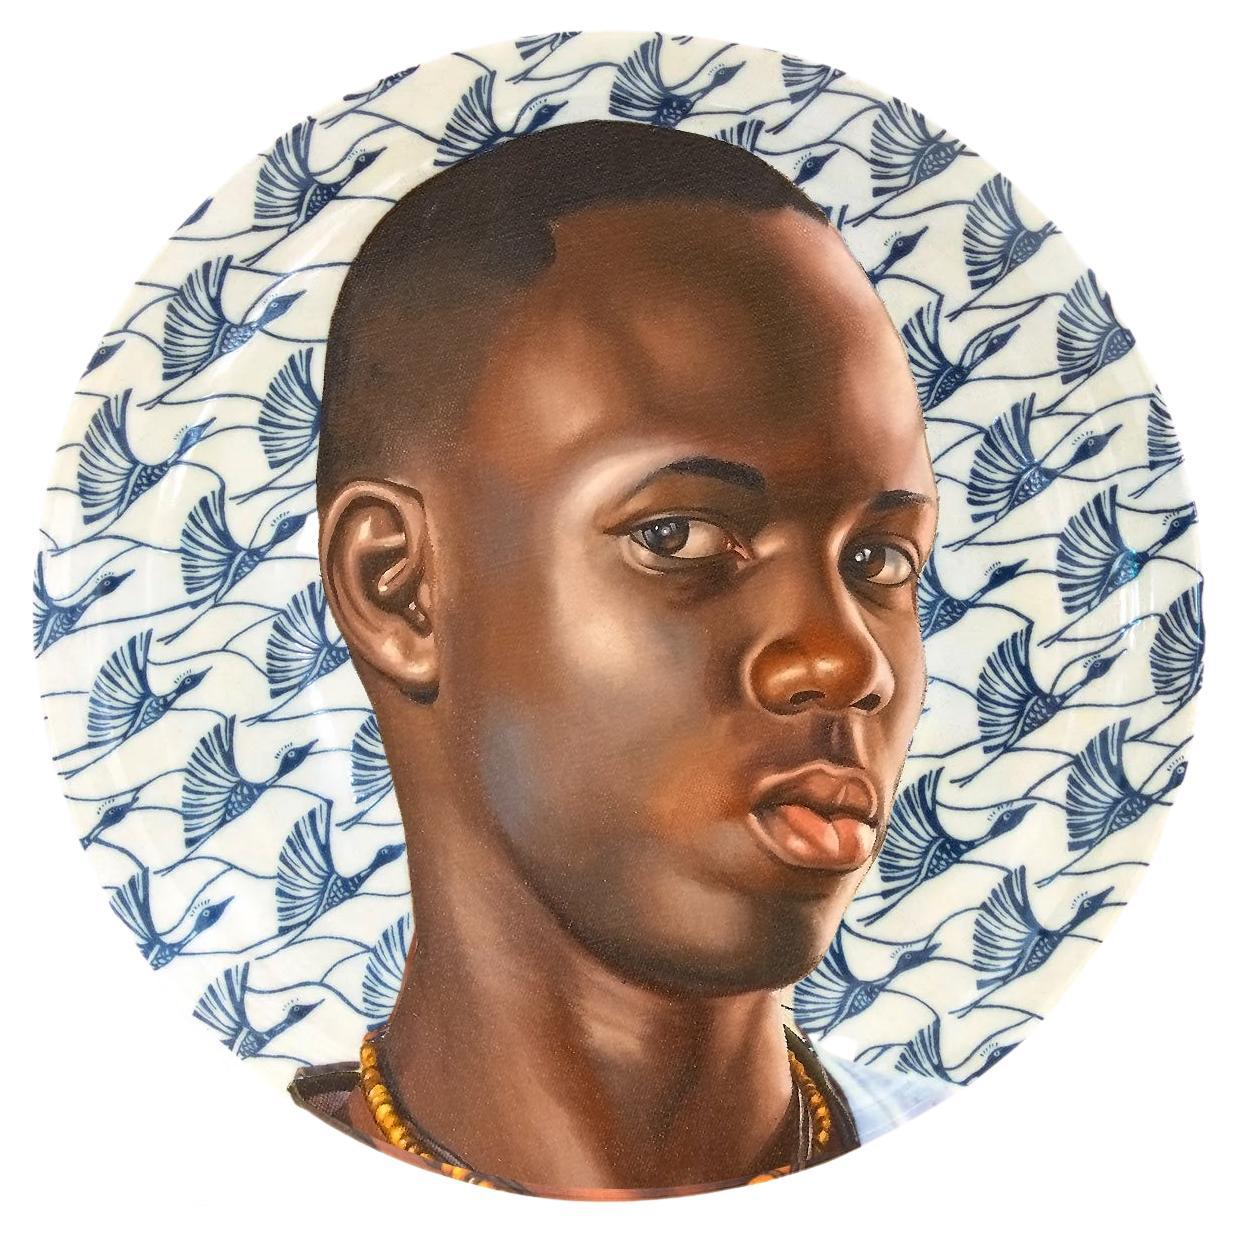 Assiette Mame Ngagne de Kehinde Wiley